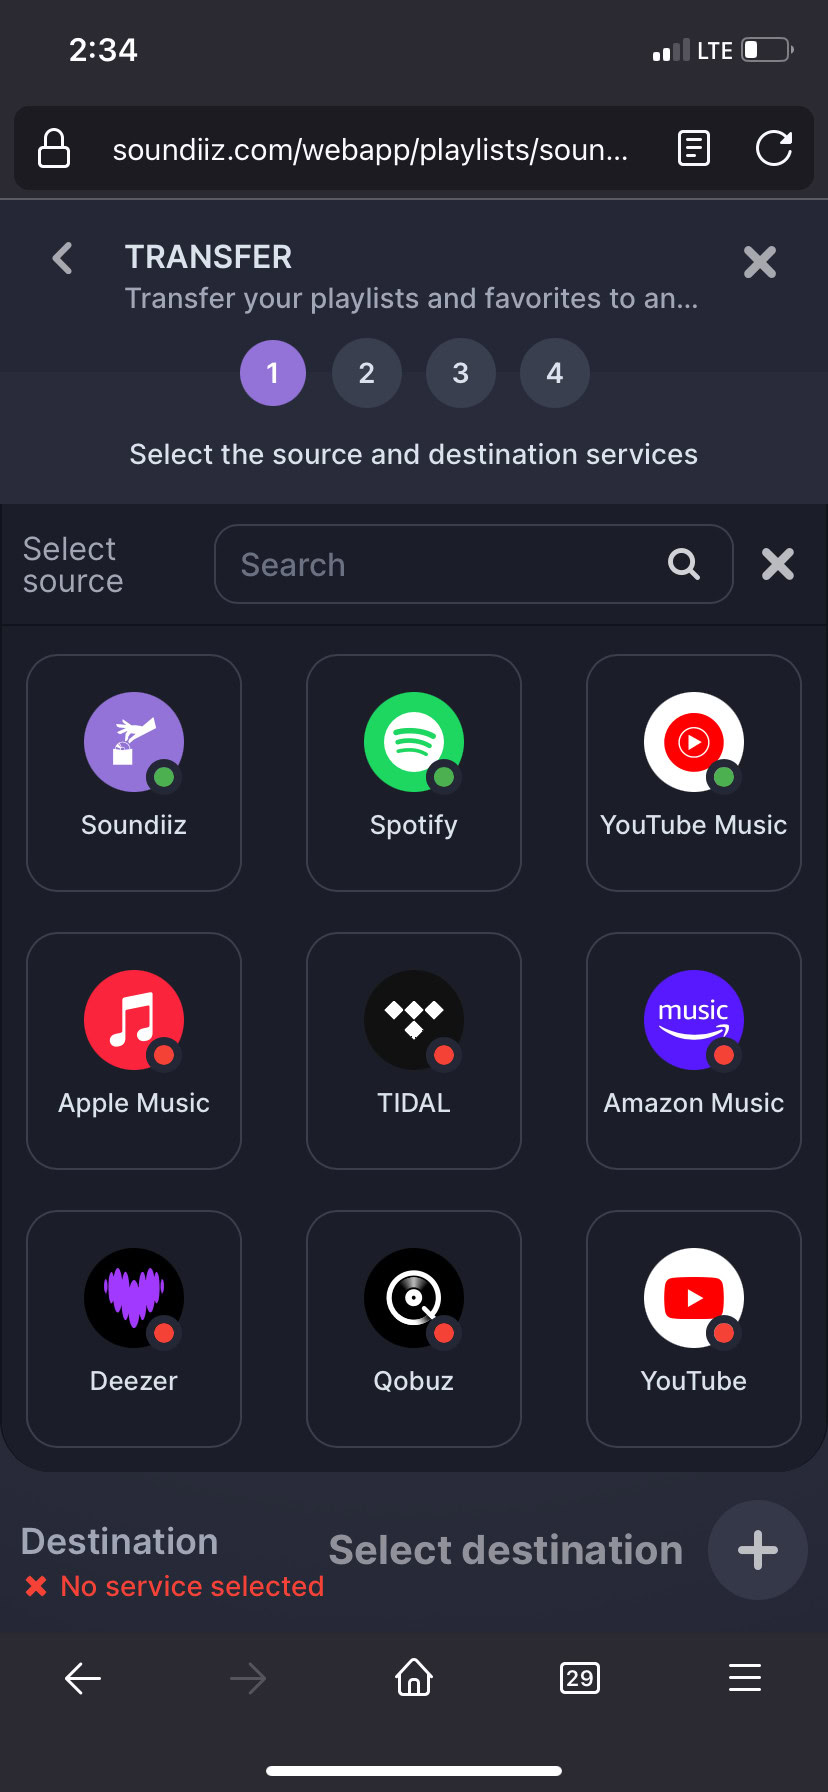 A screenshot of the various streaming services supported by Soundiiz. Buttons on the screen indicate individual services.